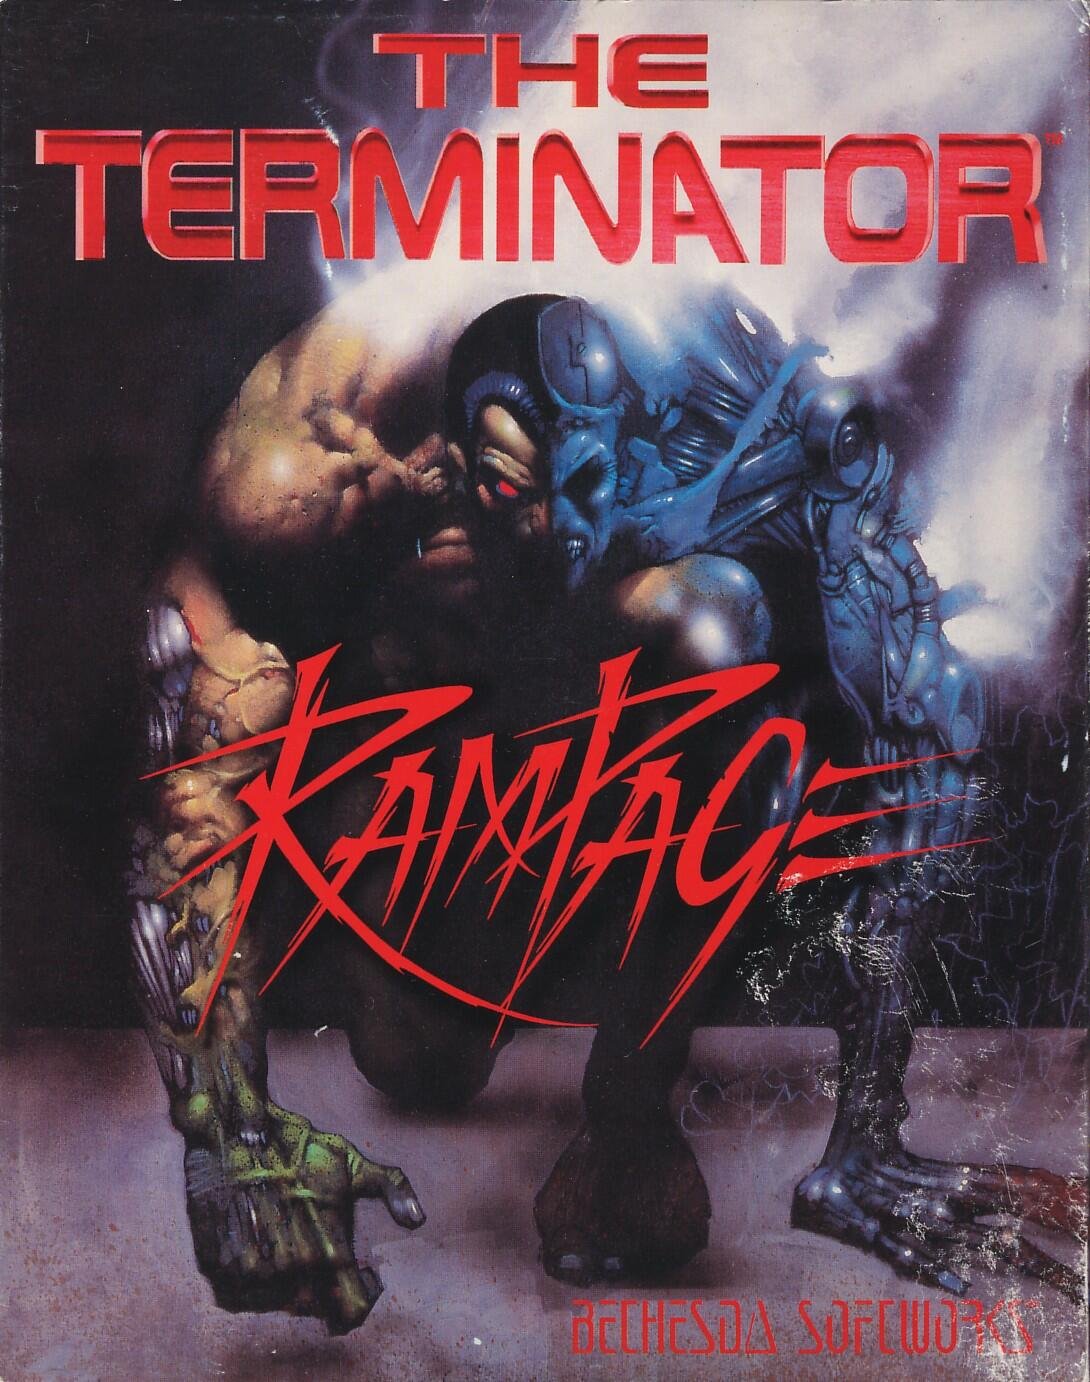 Image of The Terminator: Rampage